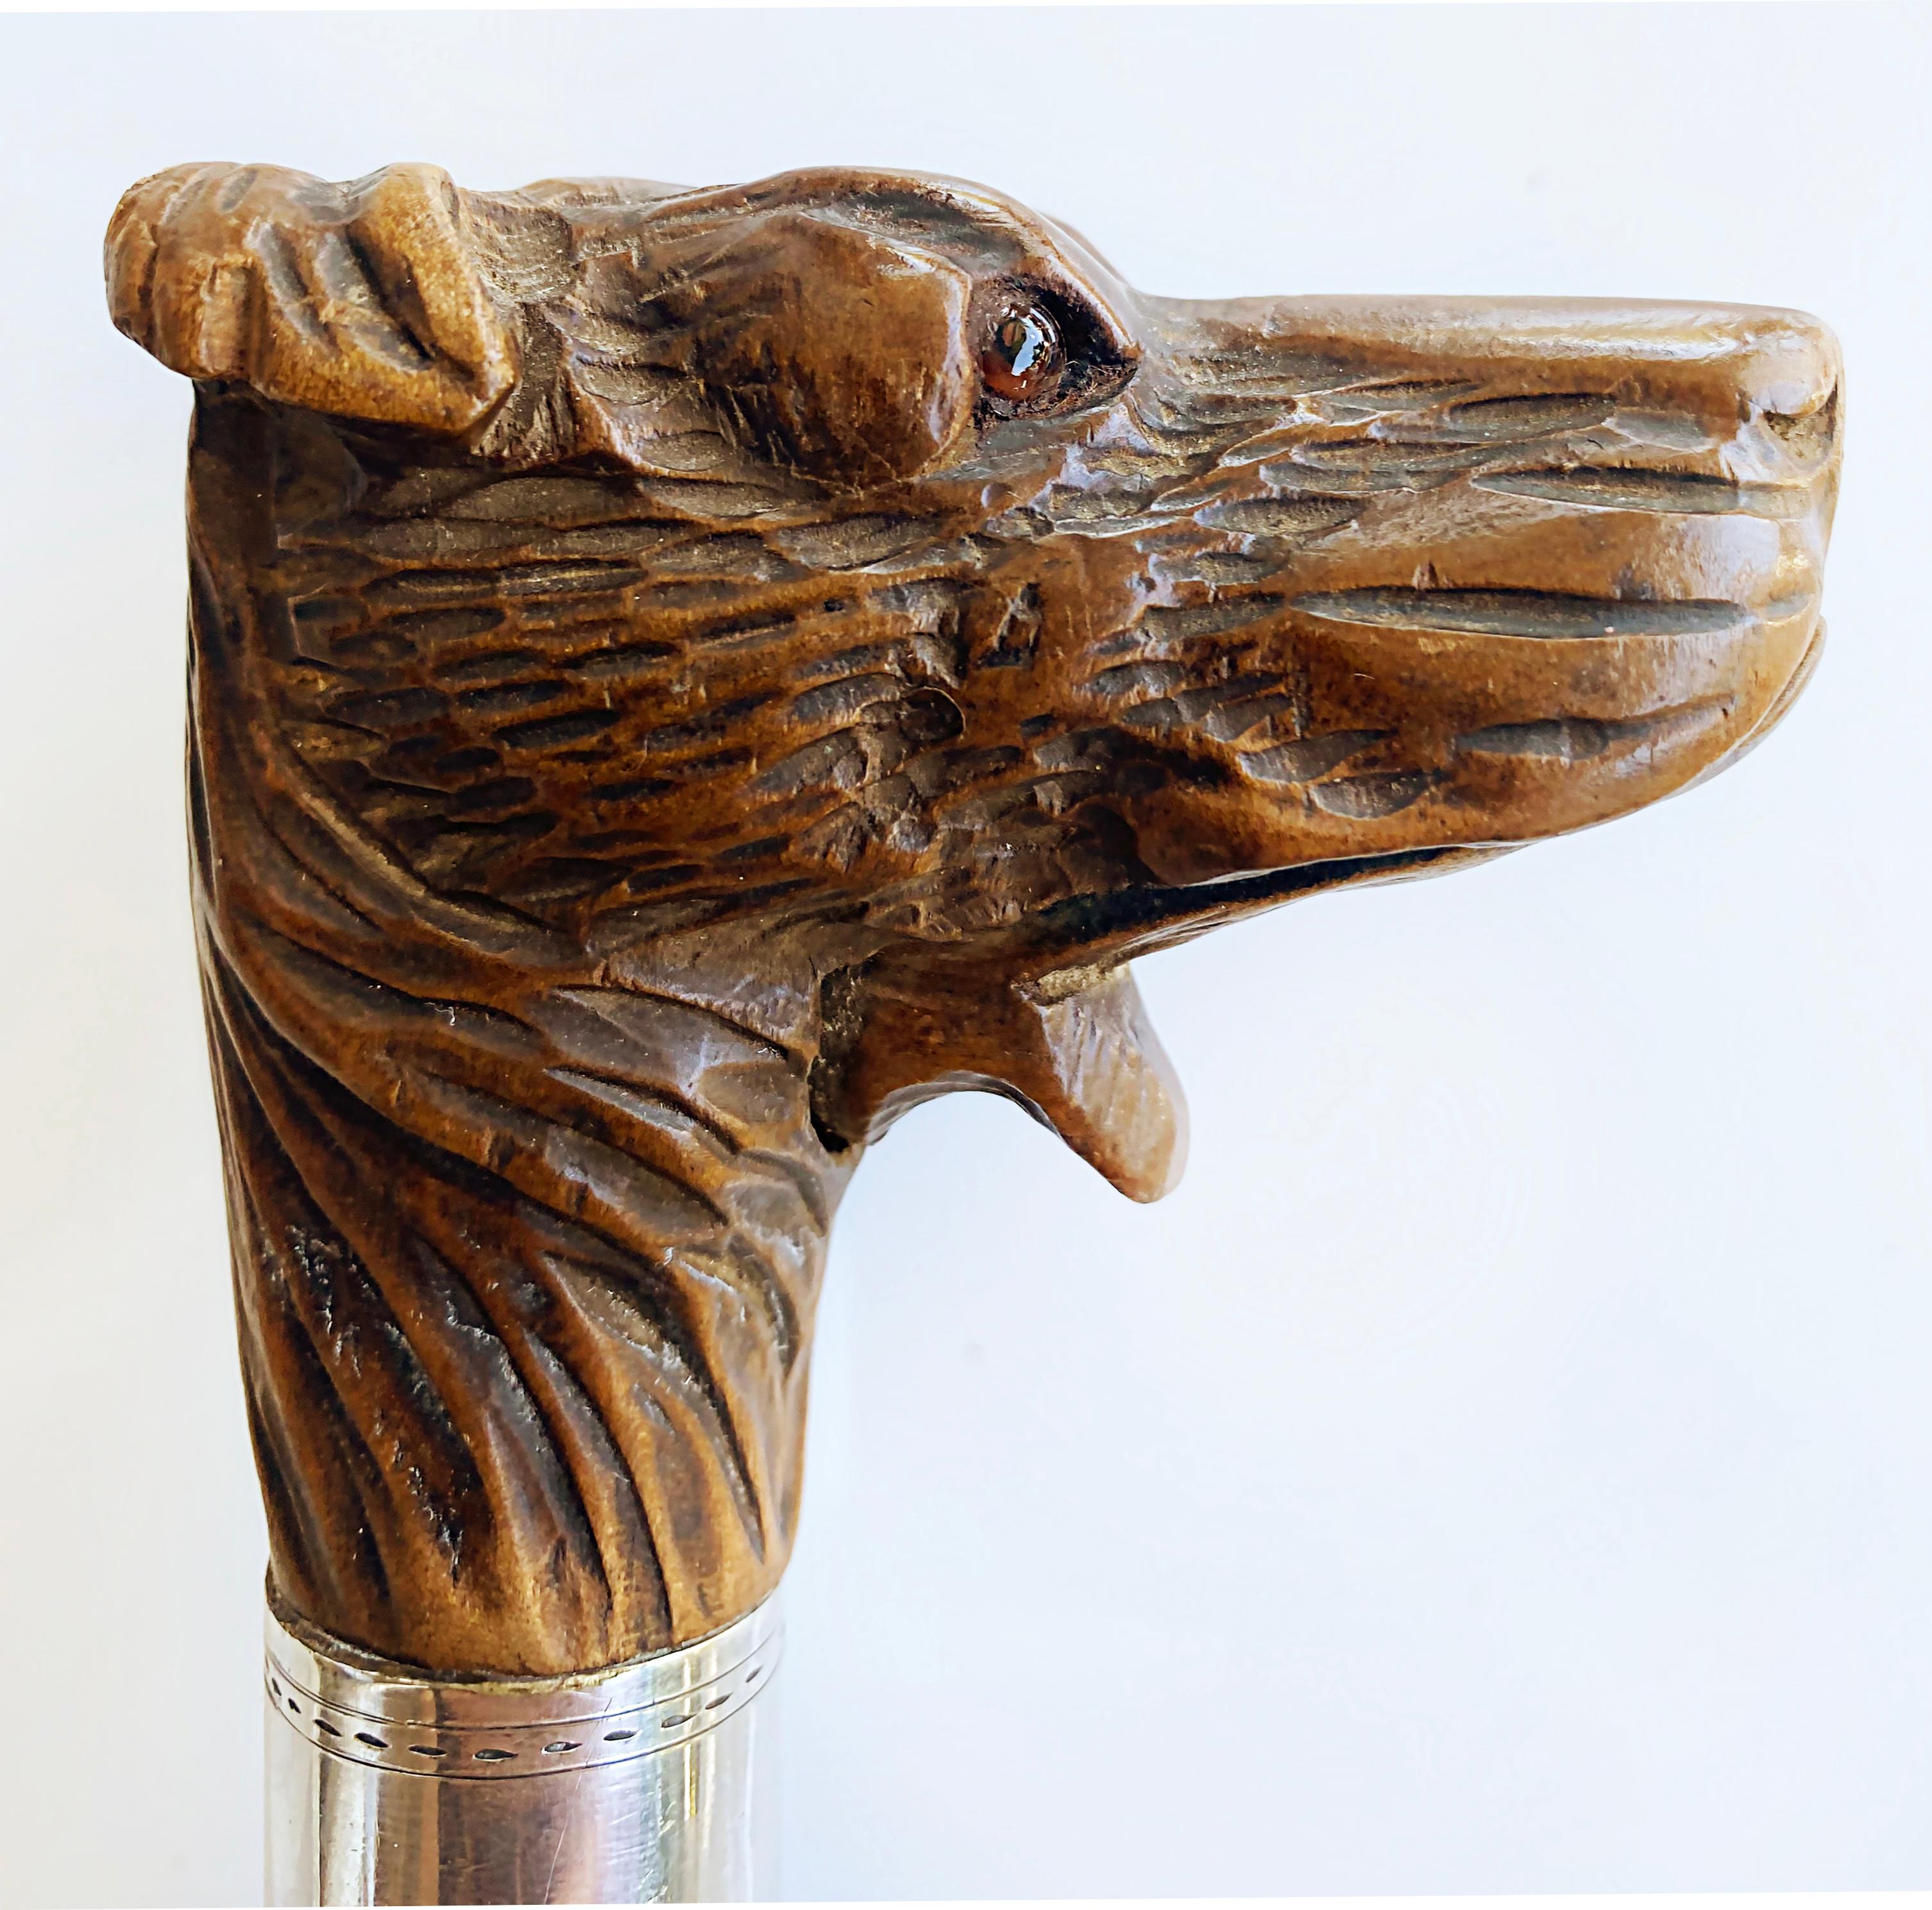 Antique Carved Dog Glove Holder Walking Stick Cane with Silver Banding

Offered for sale is a late 19th to early 20th-century antique hand-carved dog glove holder walking stick cane that has a silver band at the neck. The head has glass eyes. This